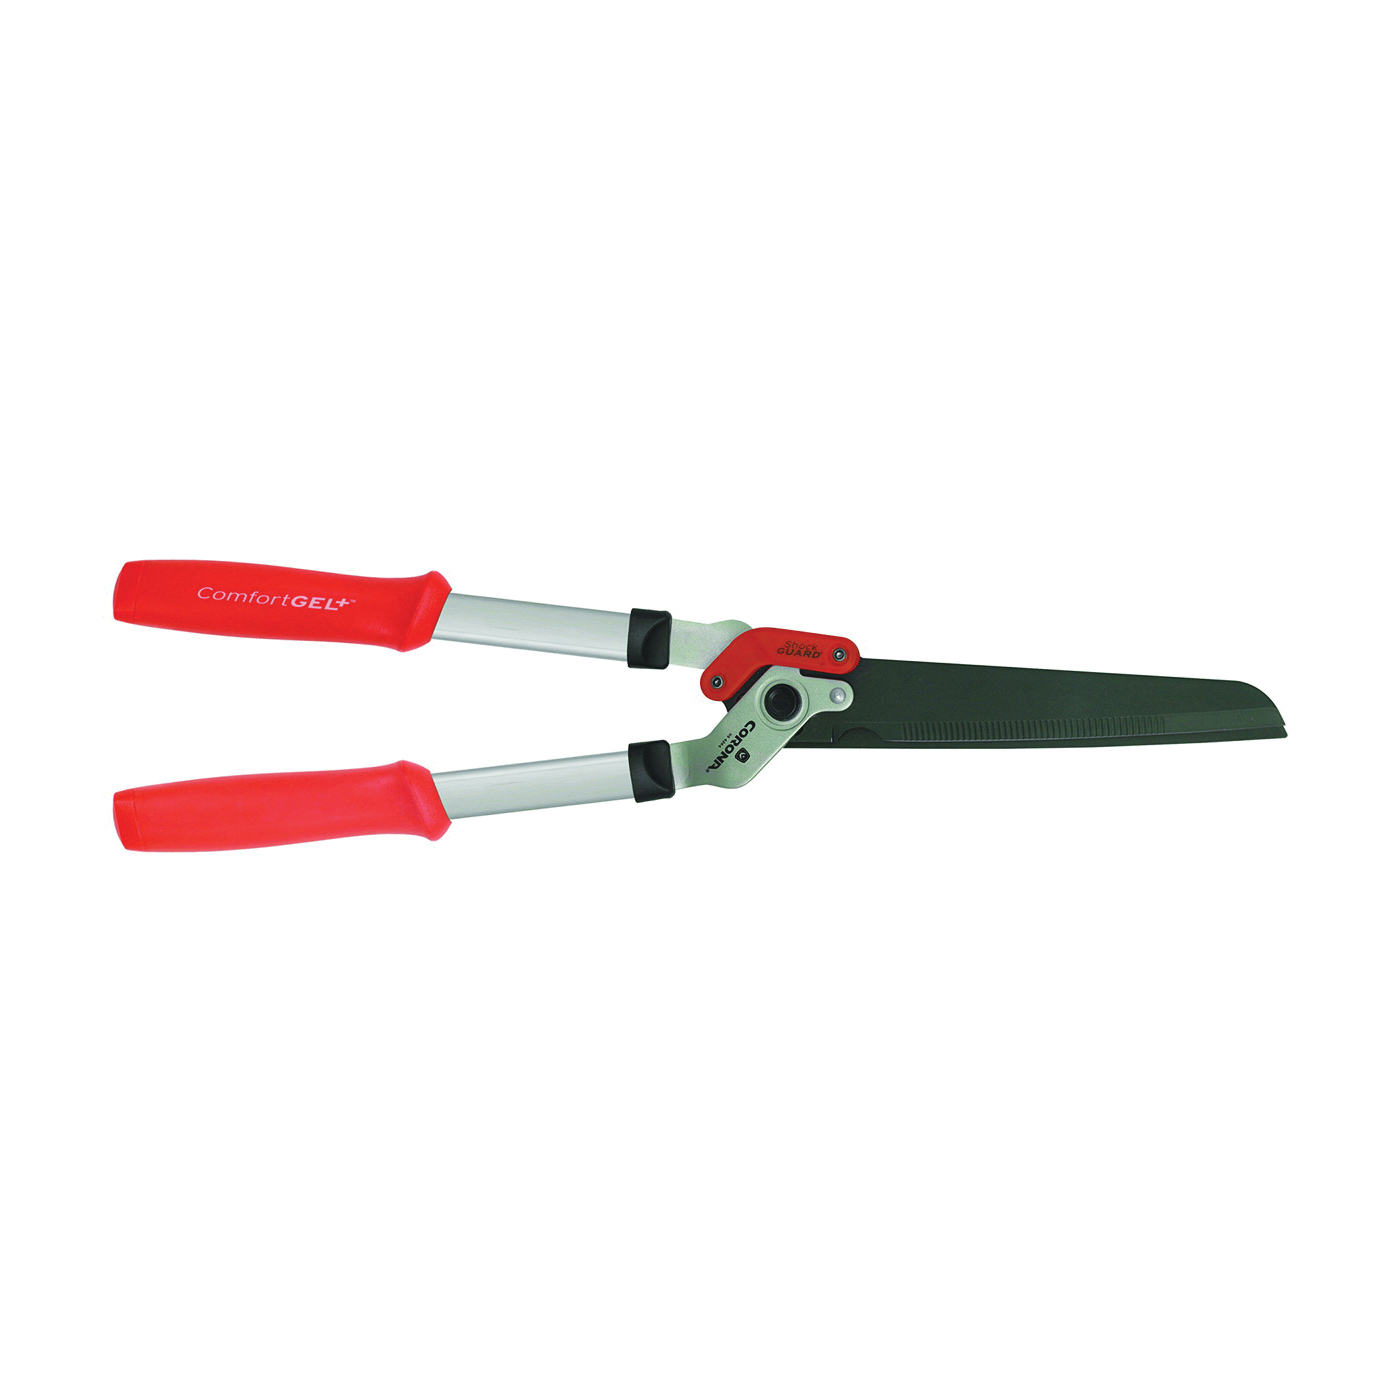 HS 4244 Hedge Shear, Steel Blade, Trapezoidal Handle, 10 in OAL